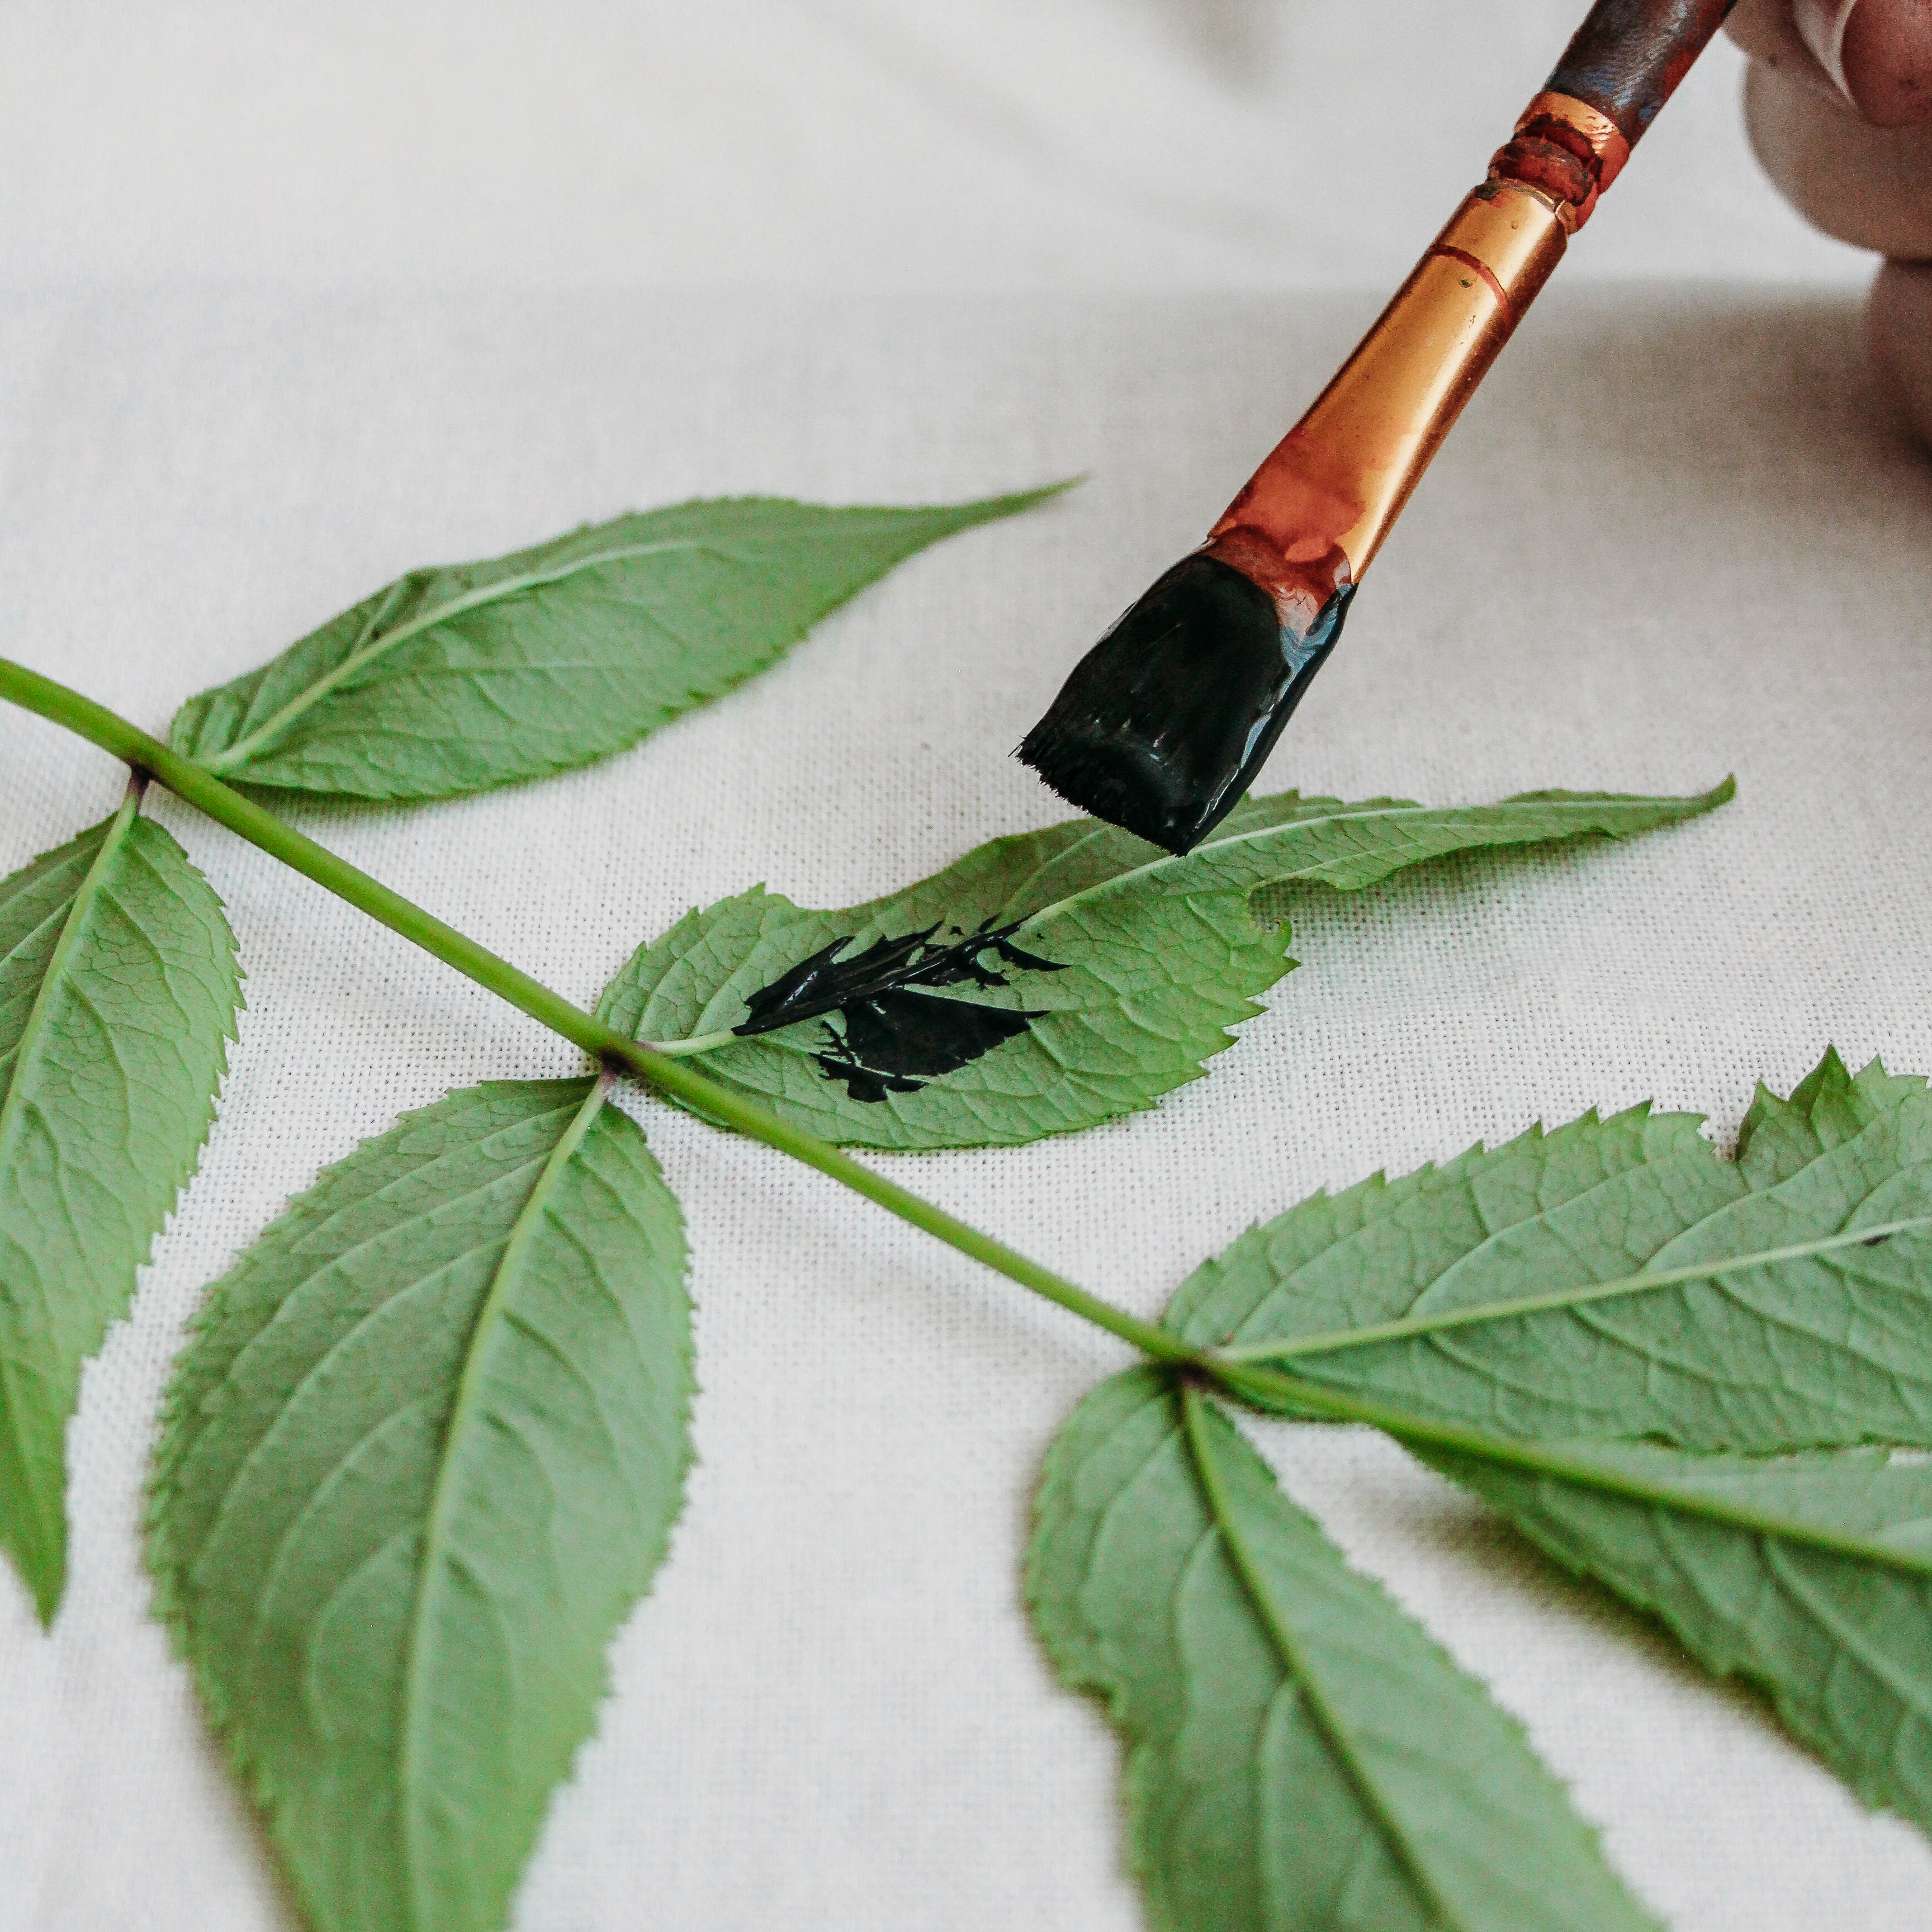 A paintbrush is painting a green leaf.